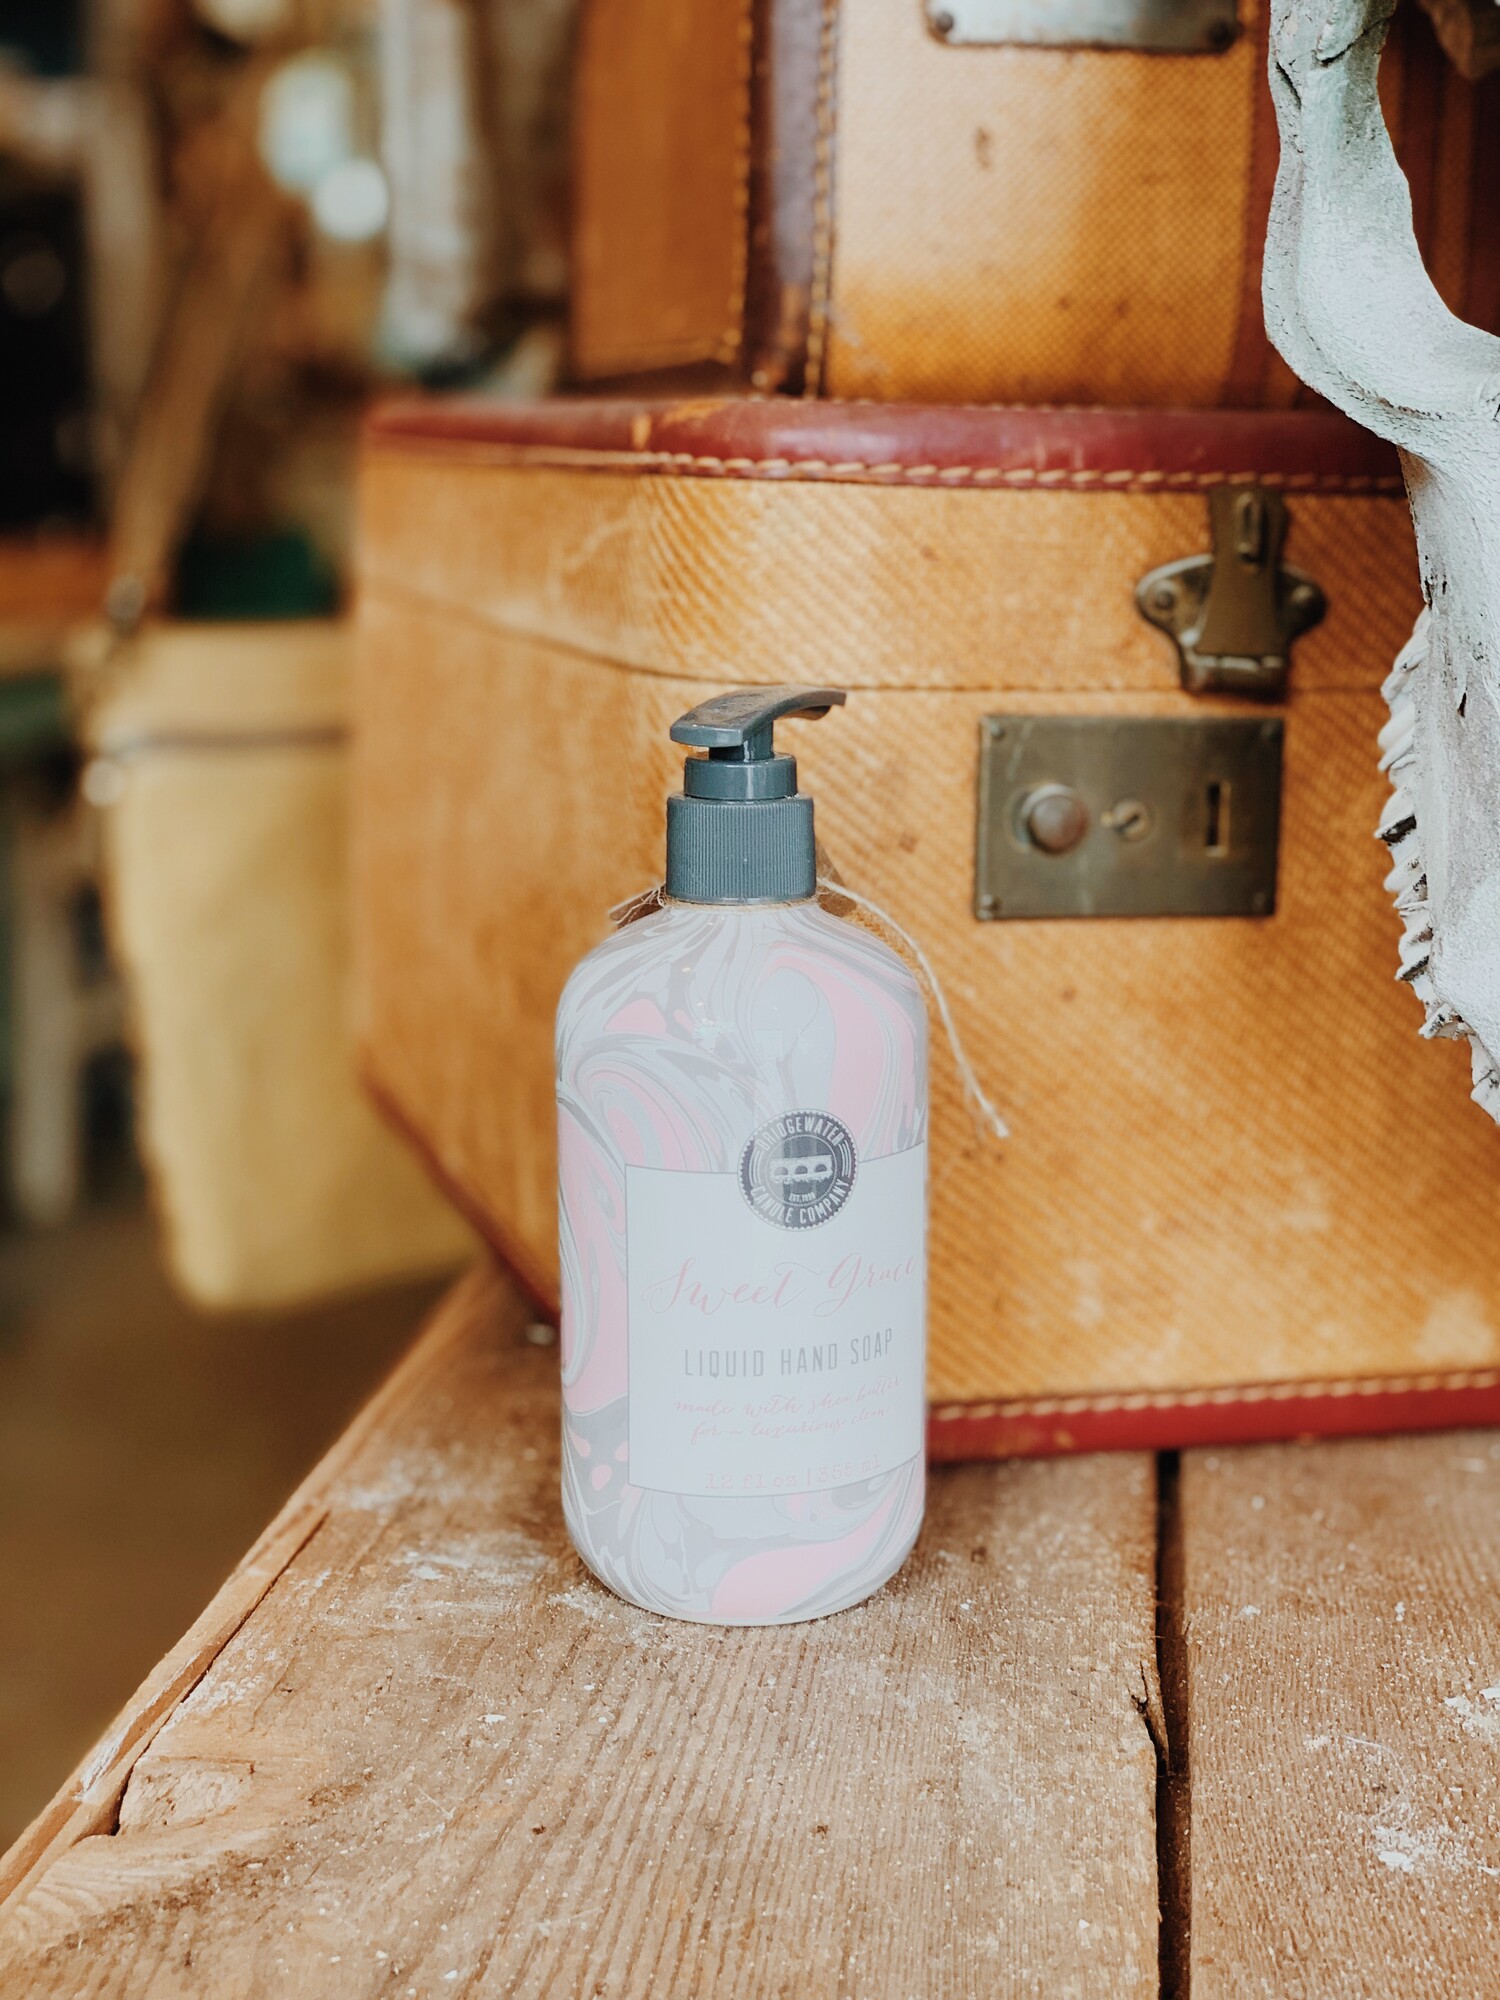 Our Bridgewater hand soap is a great, fragrant soap for your bathroom or kitchen! It comes in a 12 Fl Oz bottle and is made with shea butter for a luxurious clean!

Scent: Sweet Grace